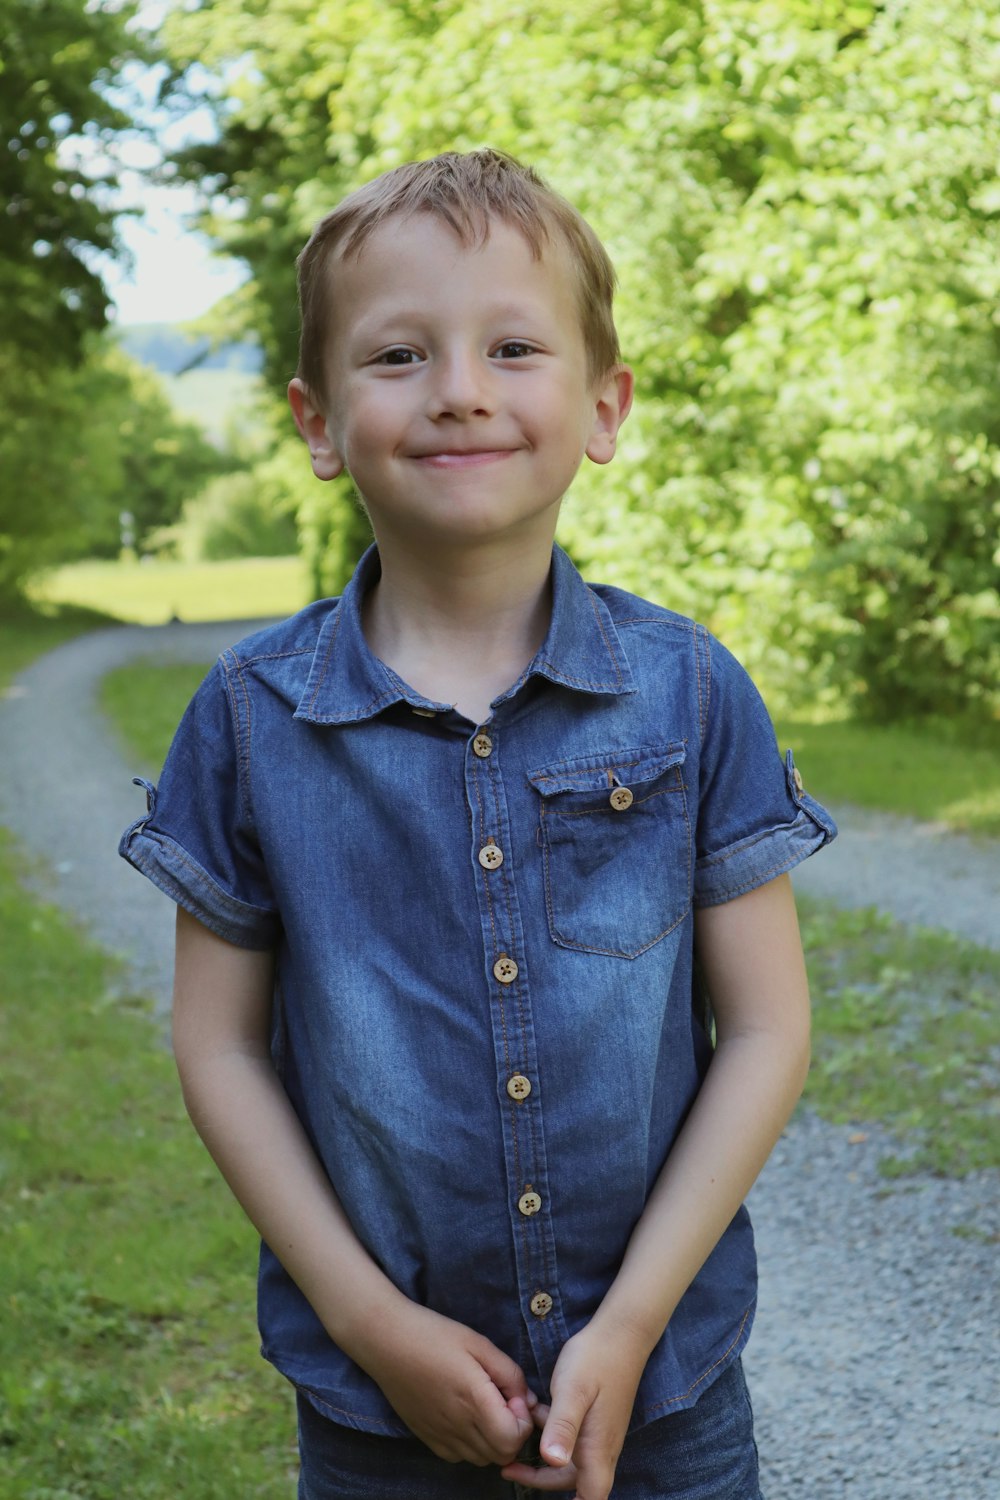 boy in blue button up shirt standing on green grass field during daytime